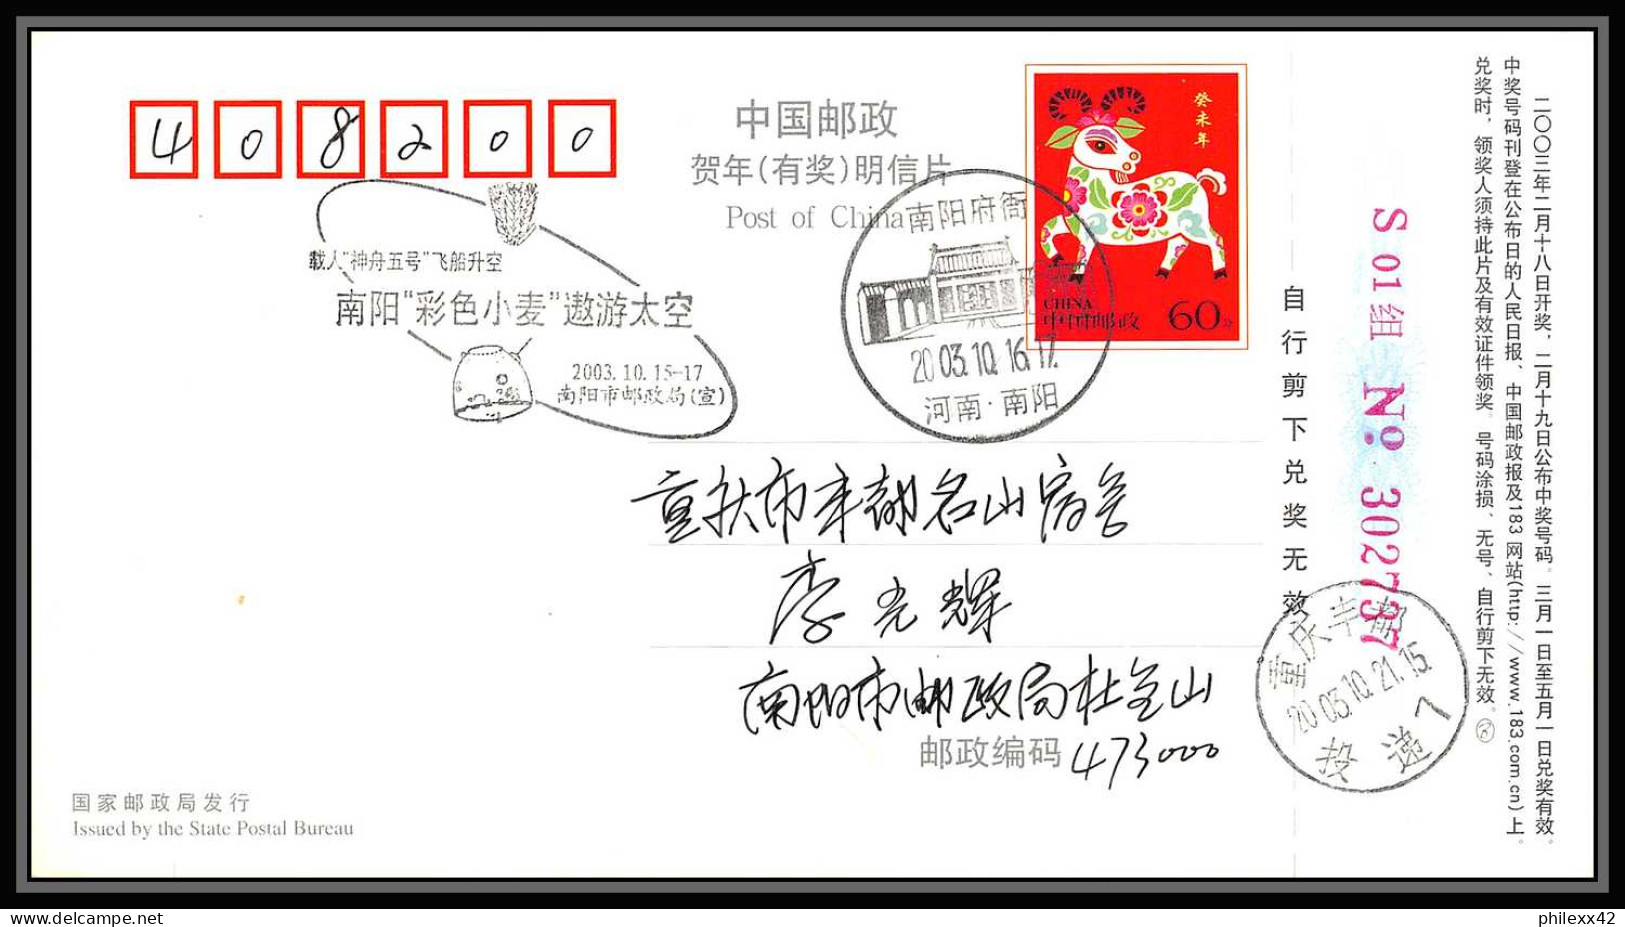 1361 Espace (space) Lot De 3 Entier Postal (Stamped Stationery) CHINE (china) 16/10/2003 YANG LIWEI (FIRST TAIKONAUT)  - Asie